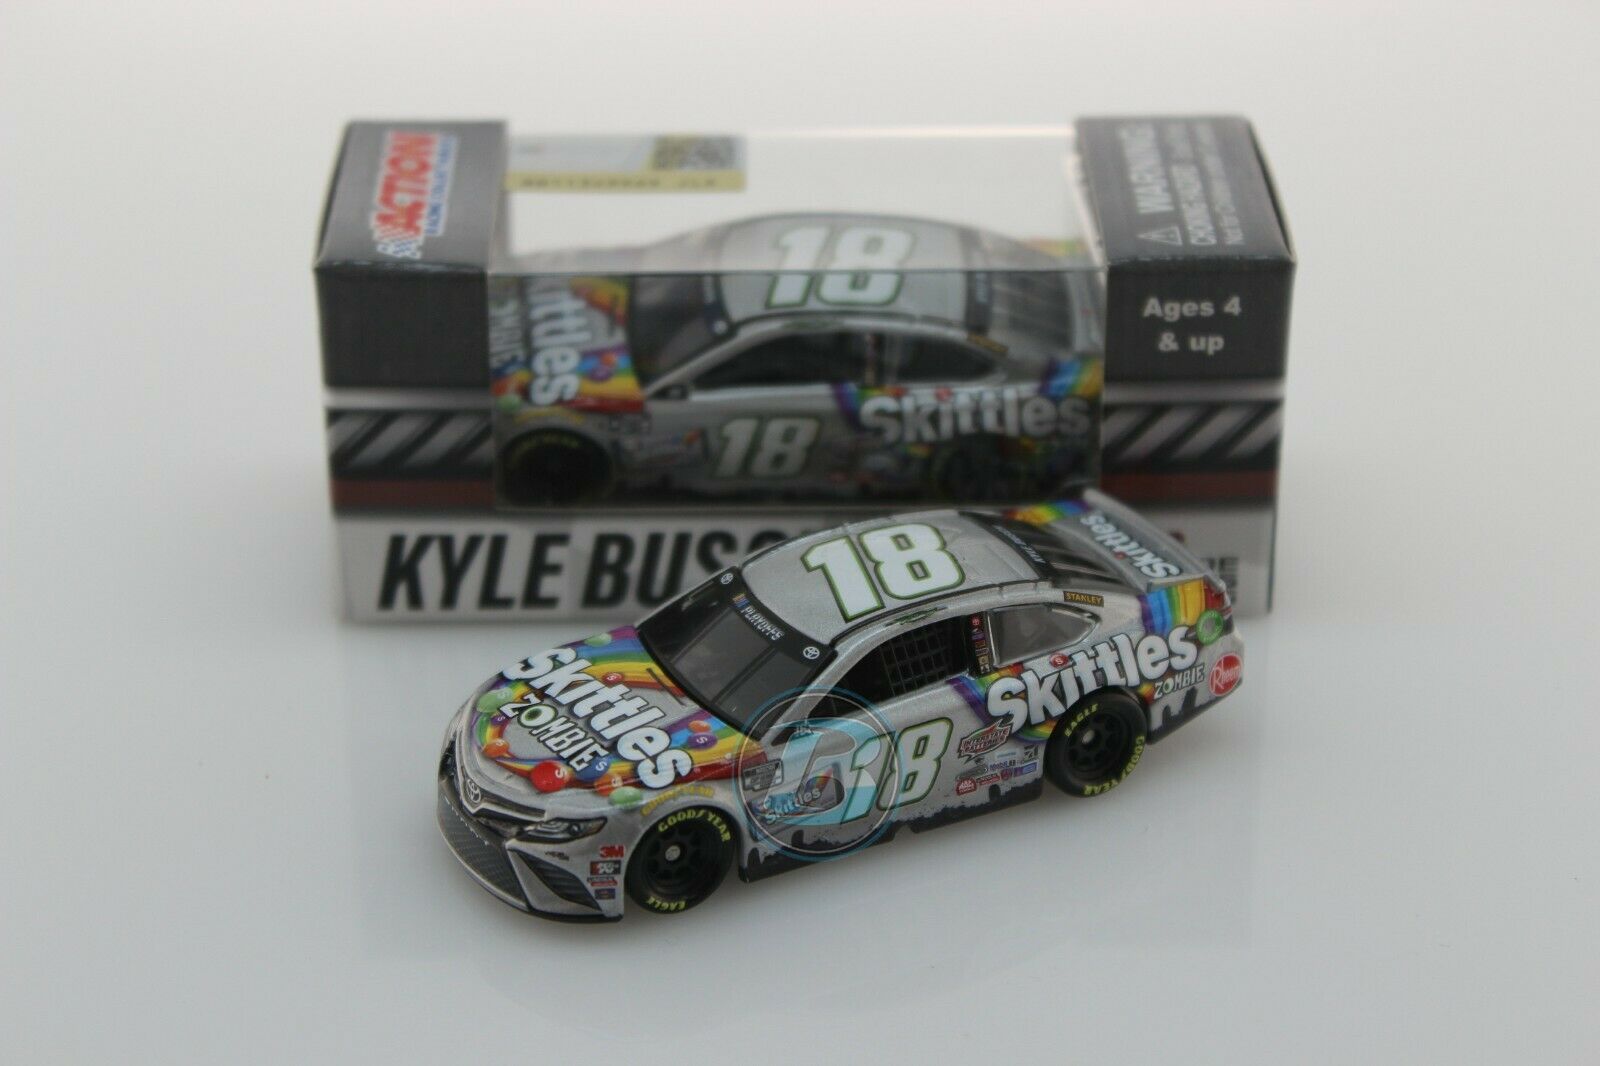 2020 Kyle Busch #18 Skittles Zombies 1:64 In Stock Free Shipping